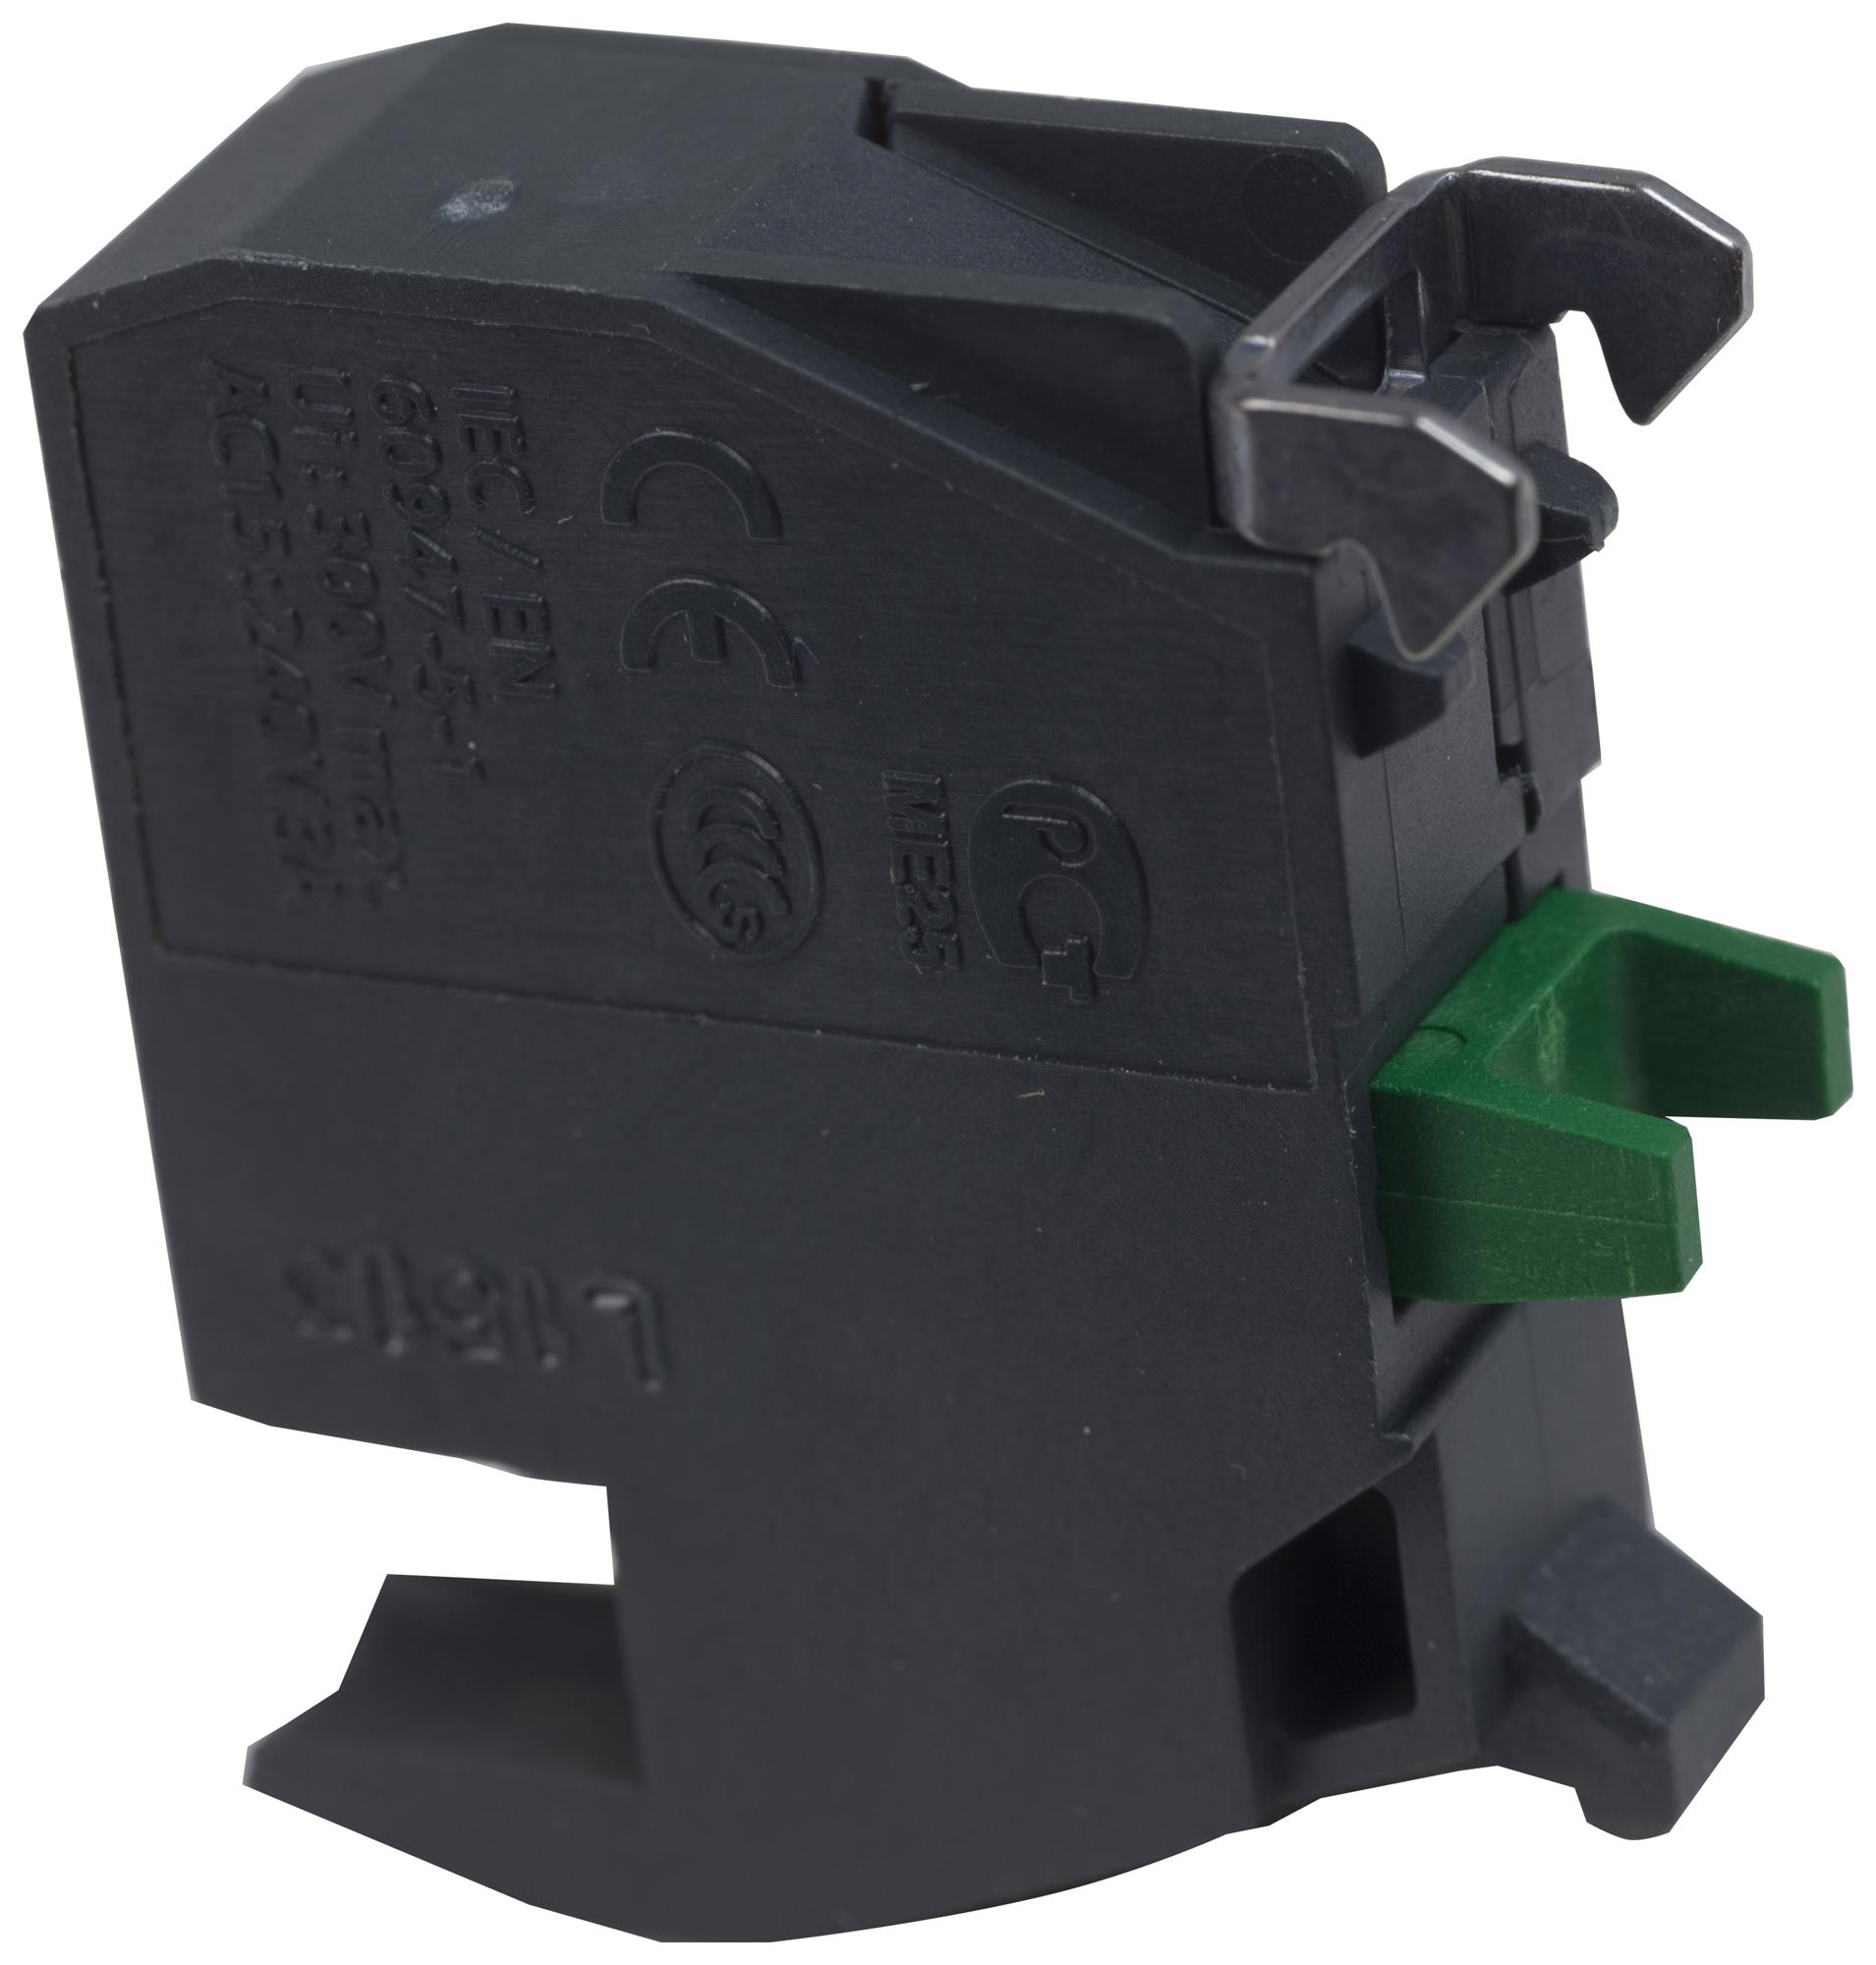 SCHNEIDER ELECTRIC Contact Blocks ZBE1014 CONTACT BLOCK, 6A, 120VAC, SCREW SCHNEIDER ELECTRIC 3215207 ZBE1014